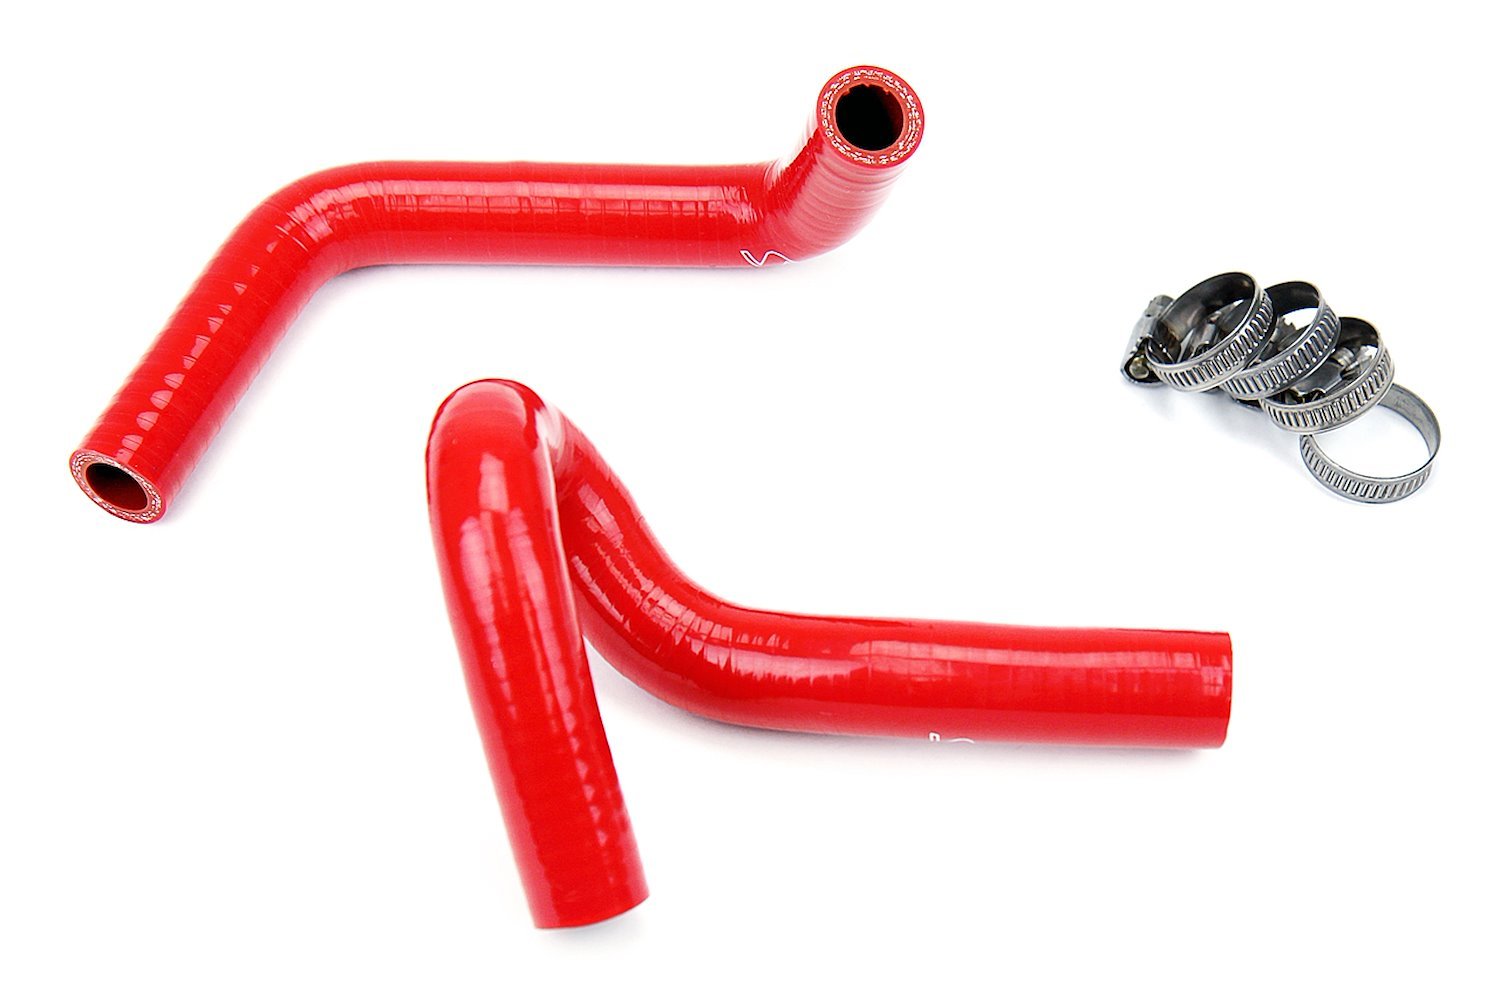 57-1310-RED Heater Hose Kit, High-Temp 3-Ply Reinforced Silicone, Replace OEM Rubber Heater Coolant Hoses